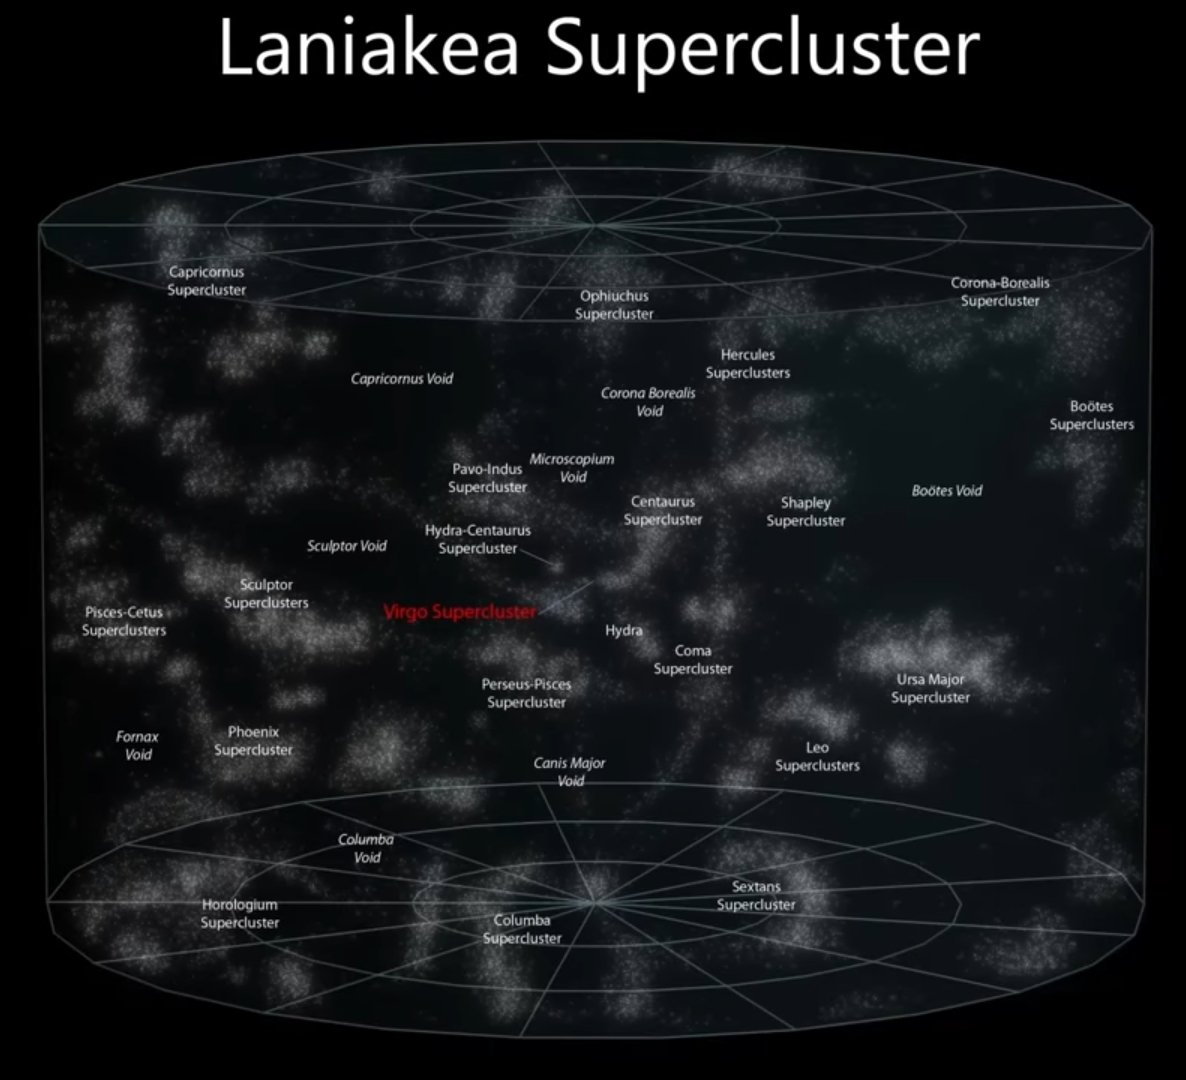 But even that is just a tiny part of the massive "Laniakea Supercluster". It contains at least 100,000 galaxies!The distance from on side to the other is around 520 Million light years!(again: 1 light year= 9.461 TRILLION Km)